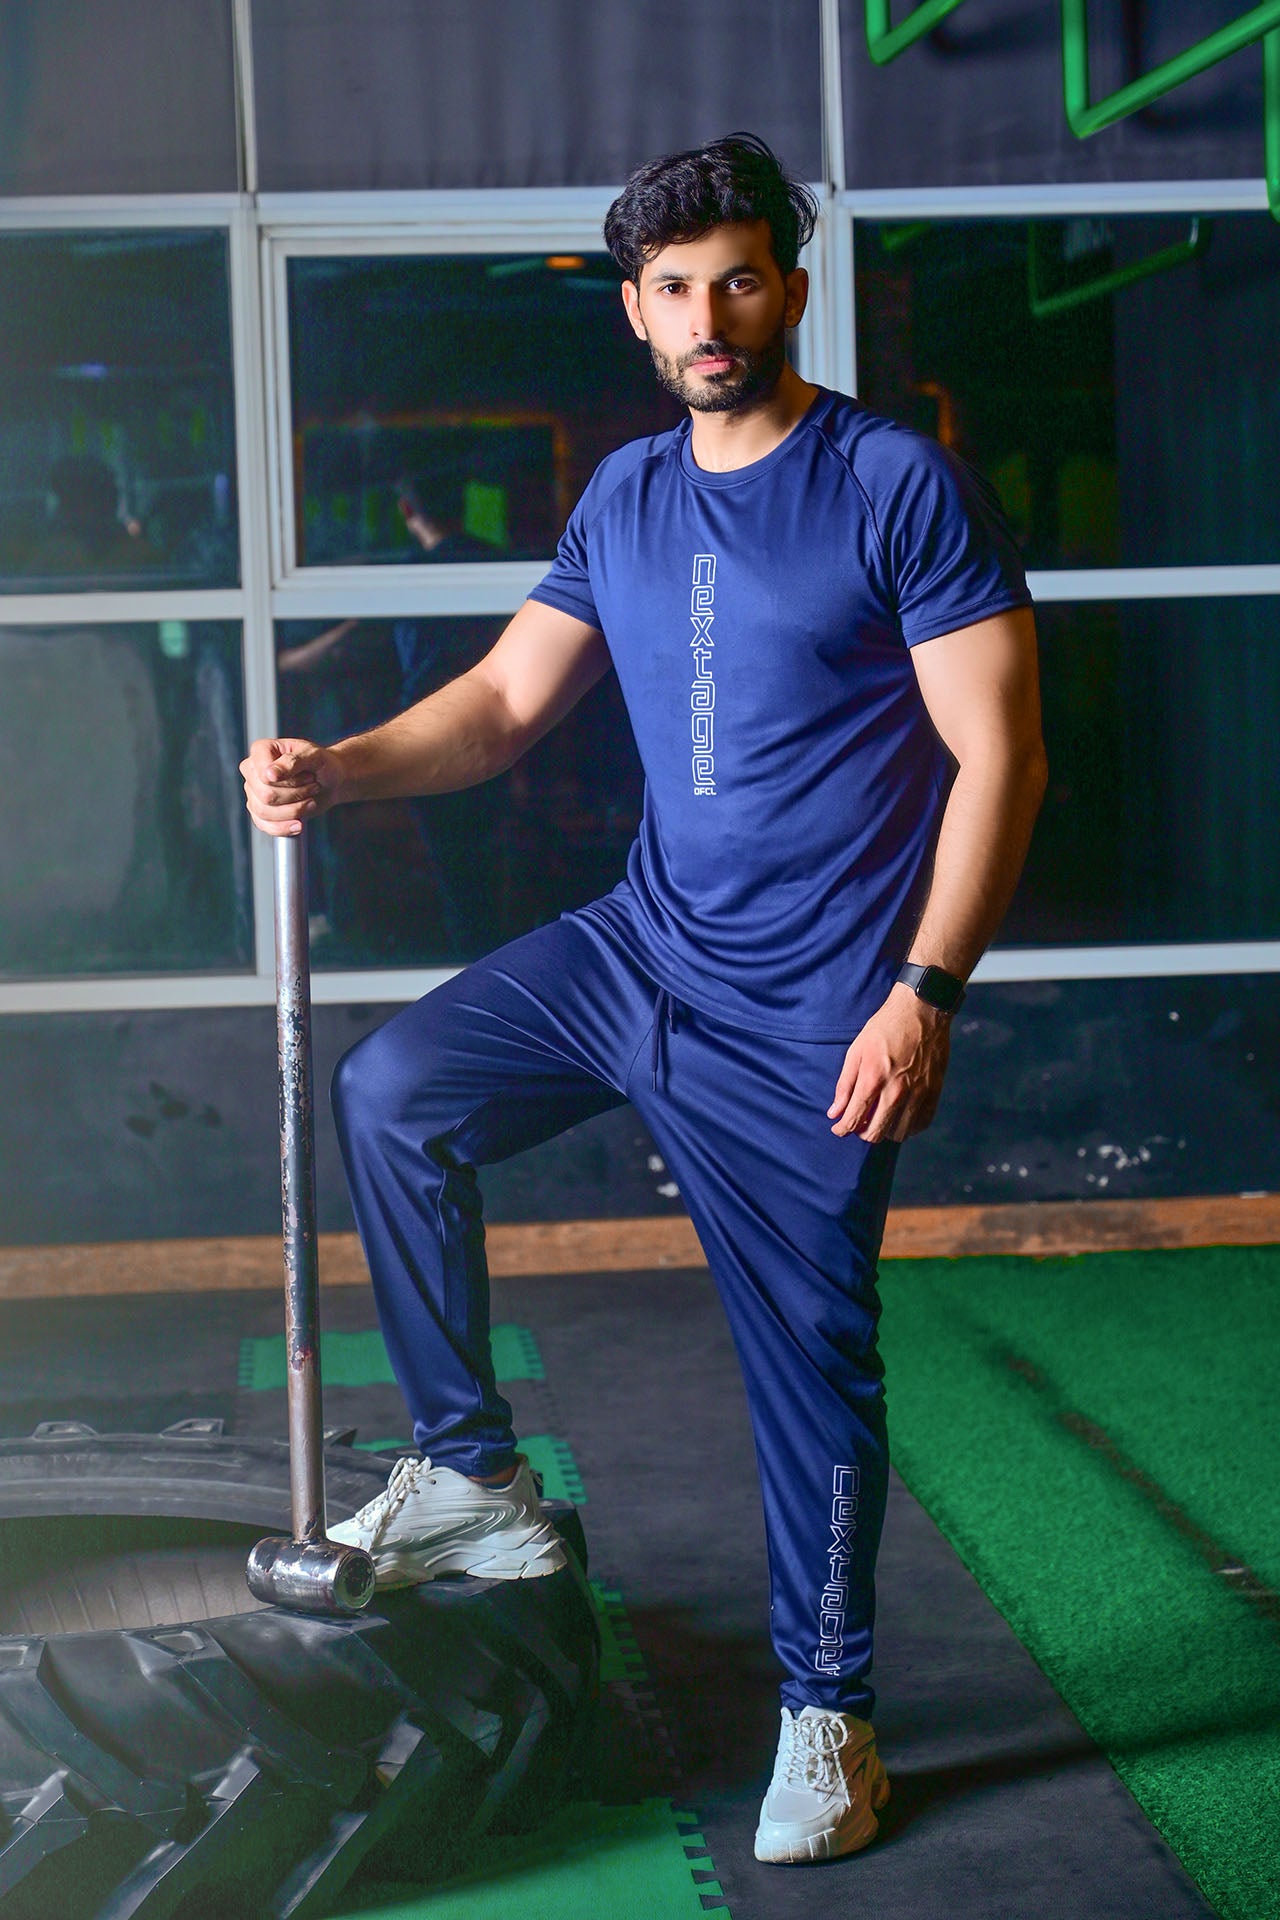 Nextage navy blue twinset, Track suit brand in pakistan,